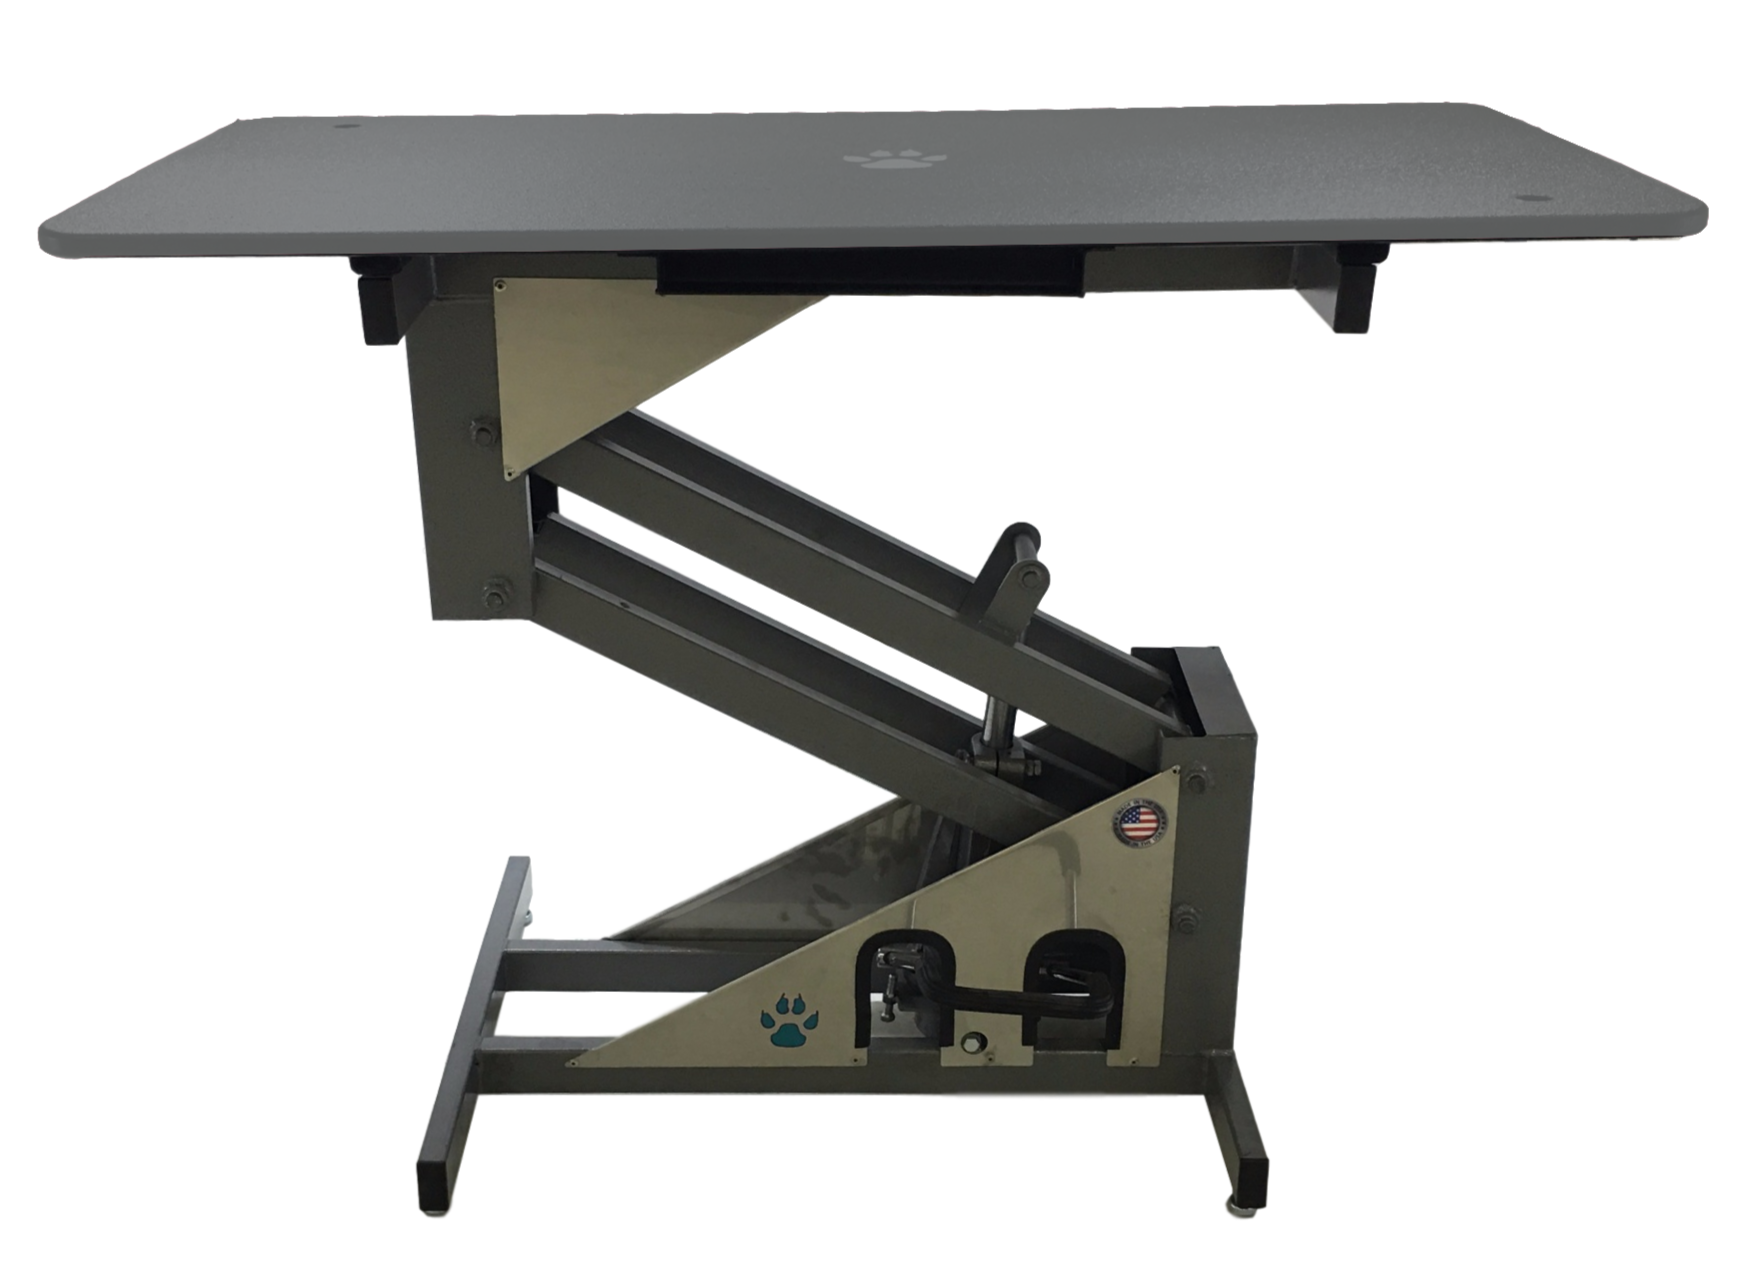 Groomer's Best Hydraulic Grooming Table with Foot Pump